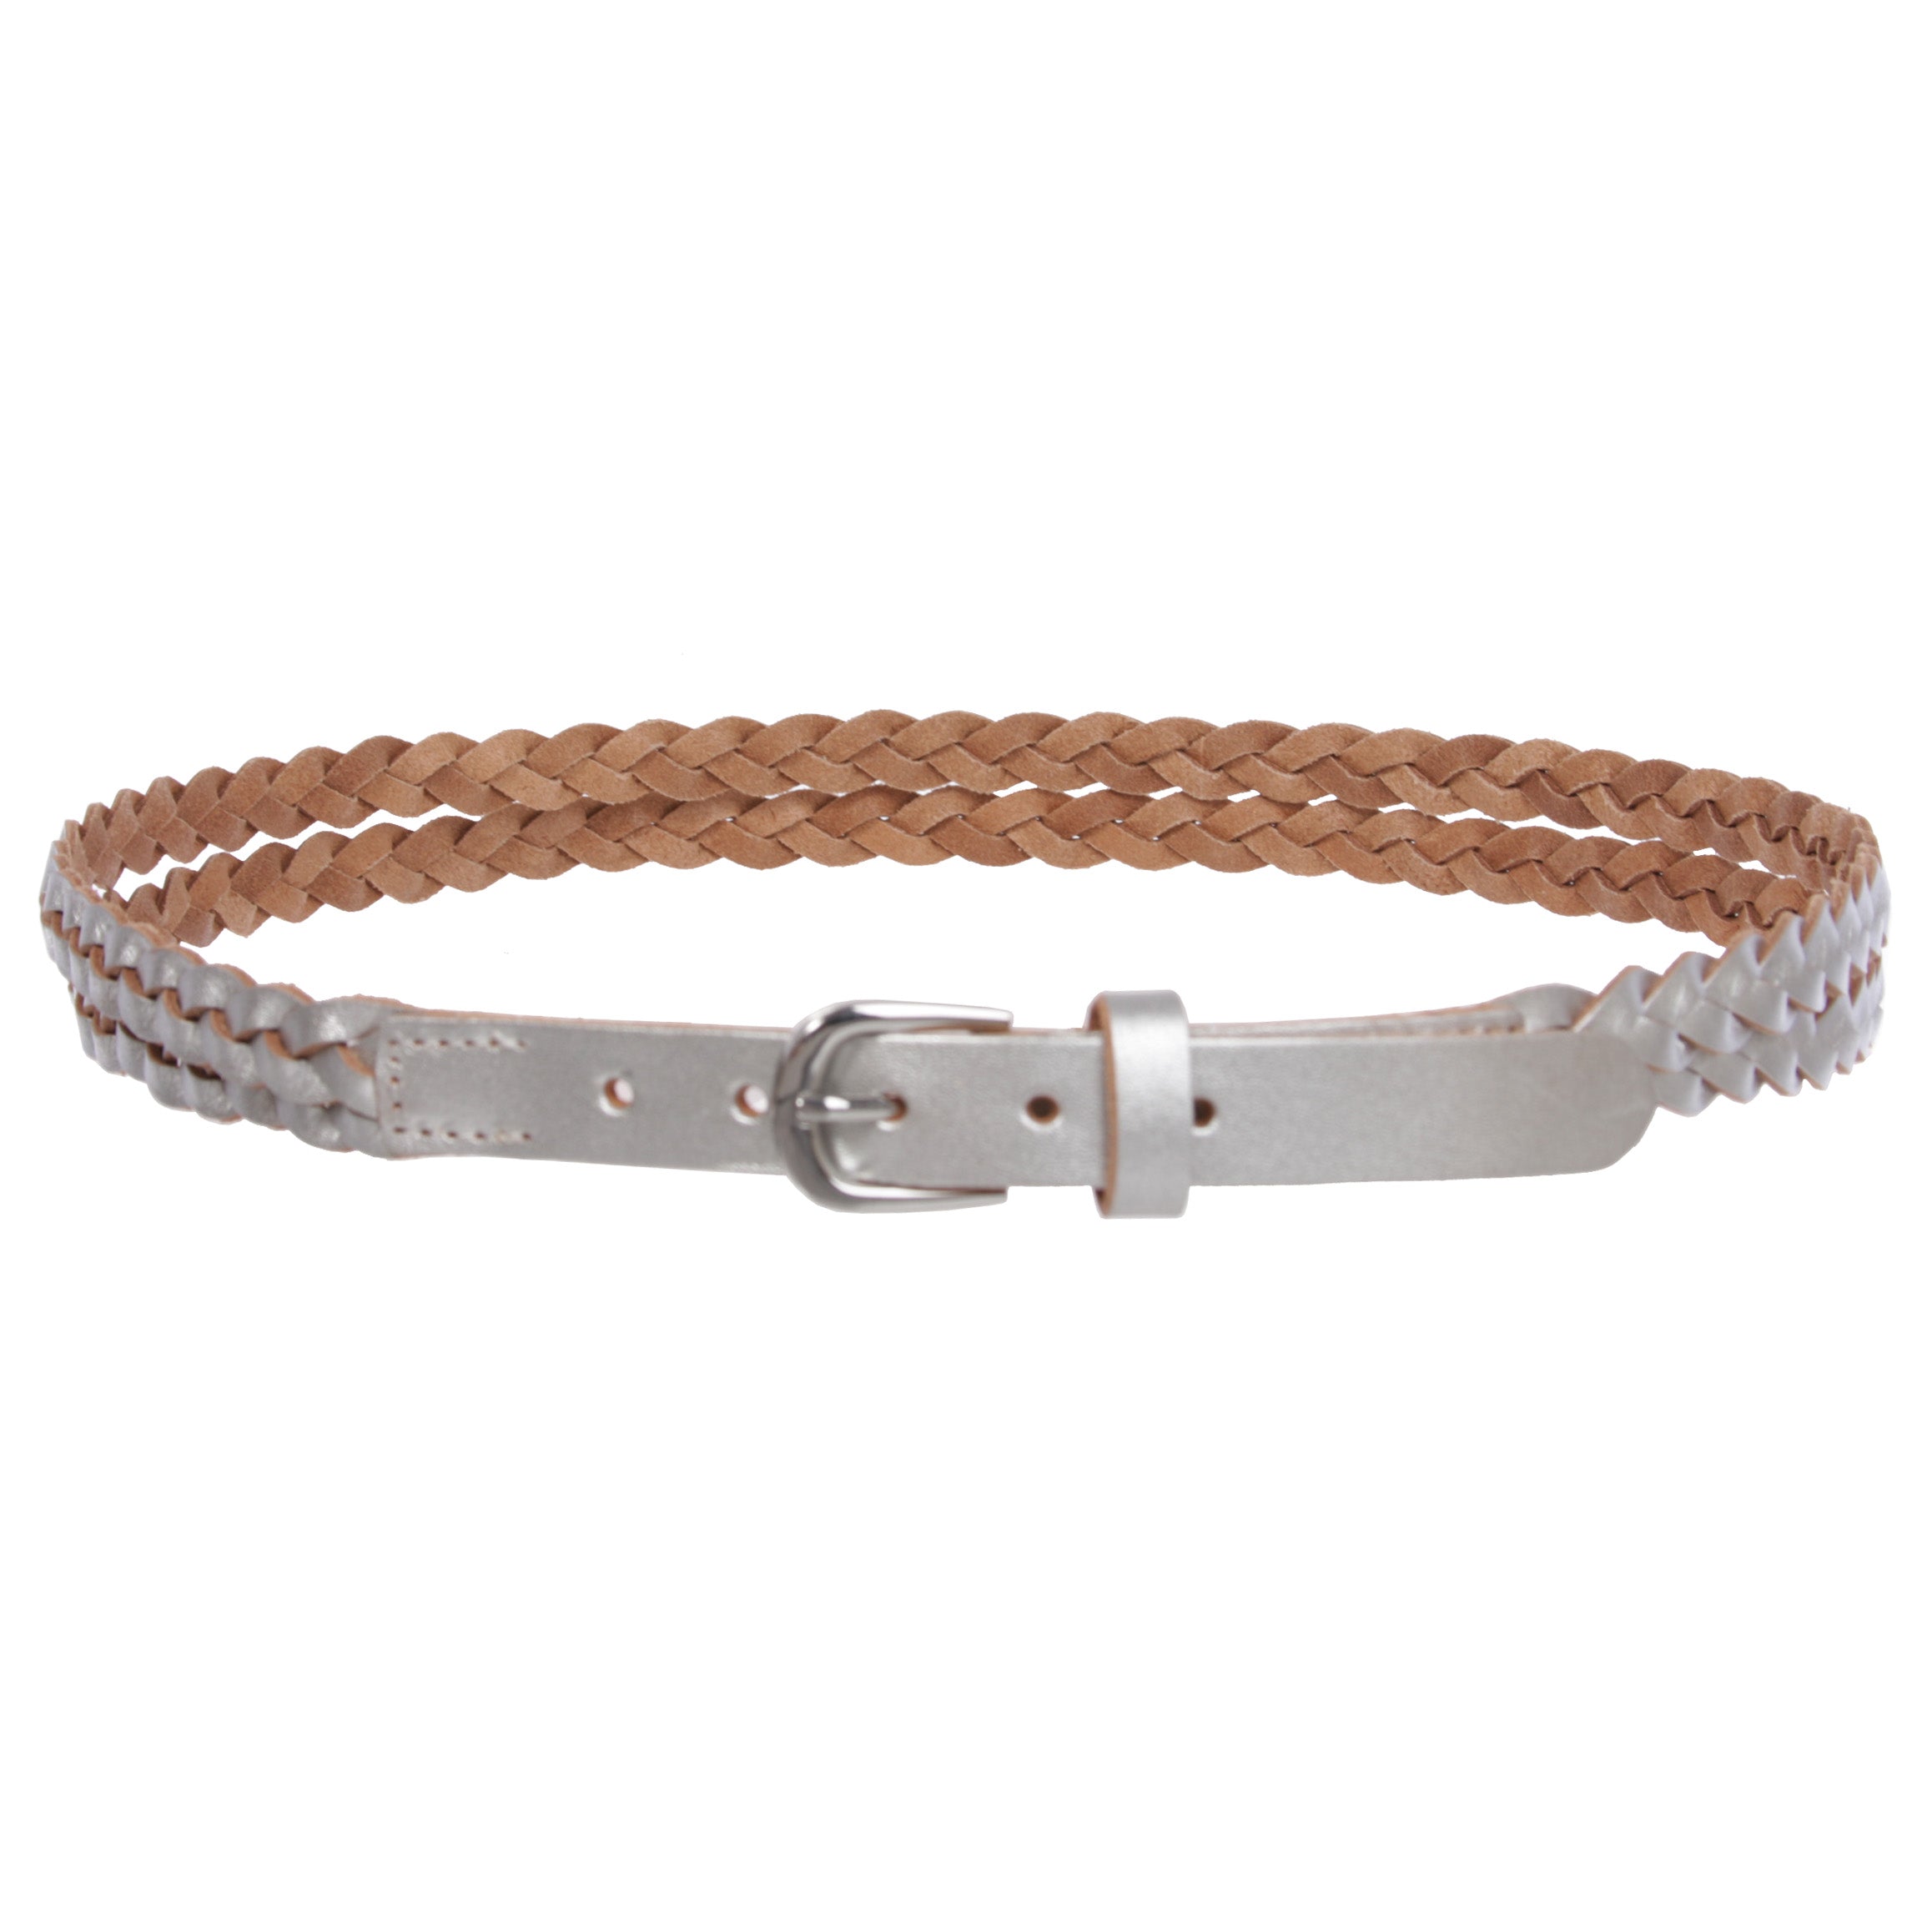 Women's Combinative Casual Leather Braided Double Belt